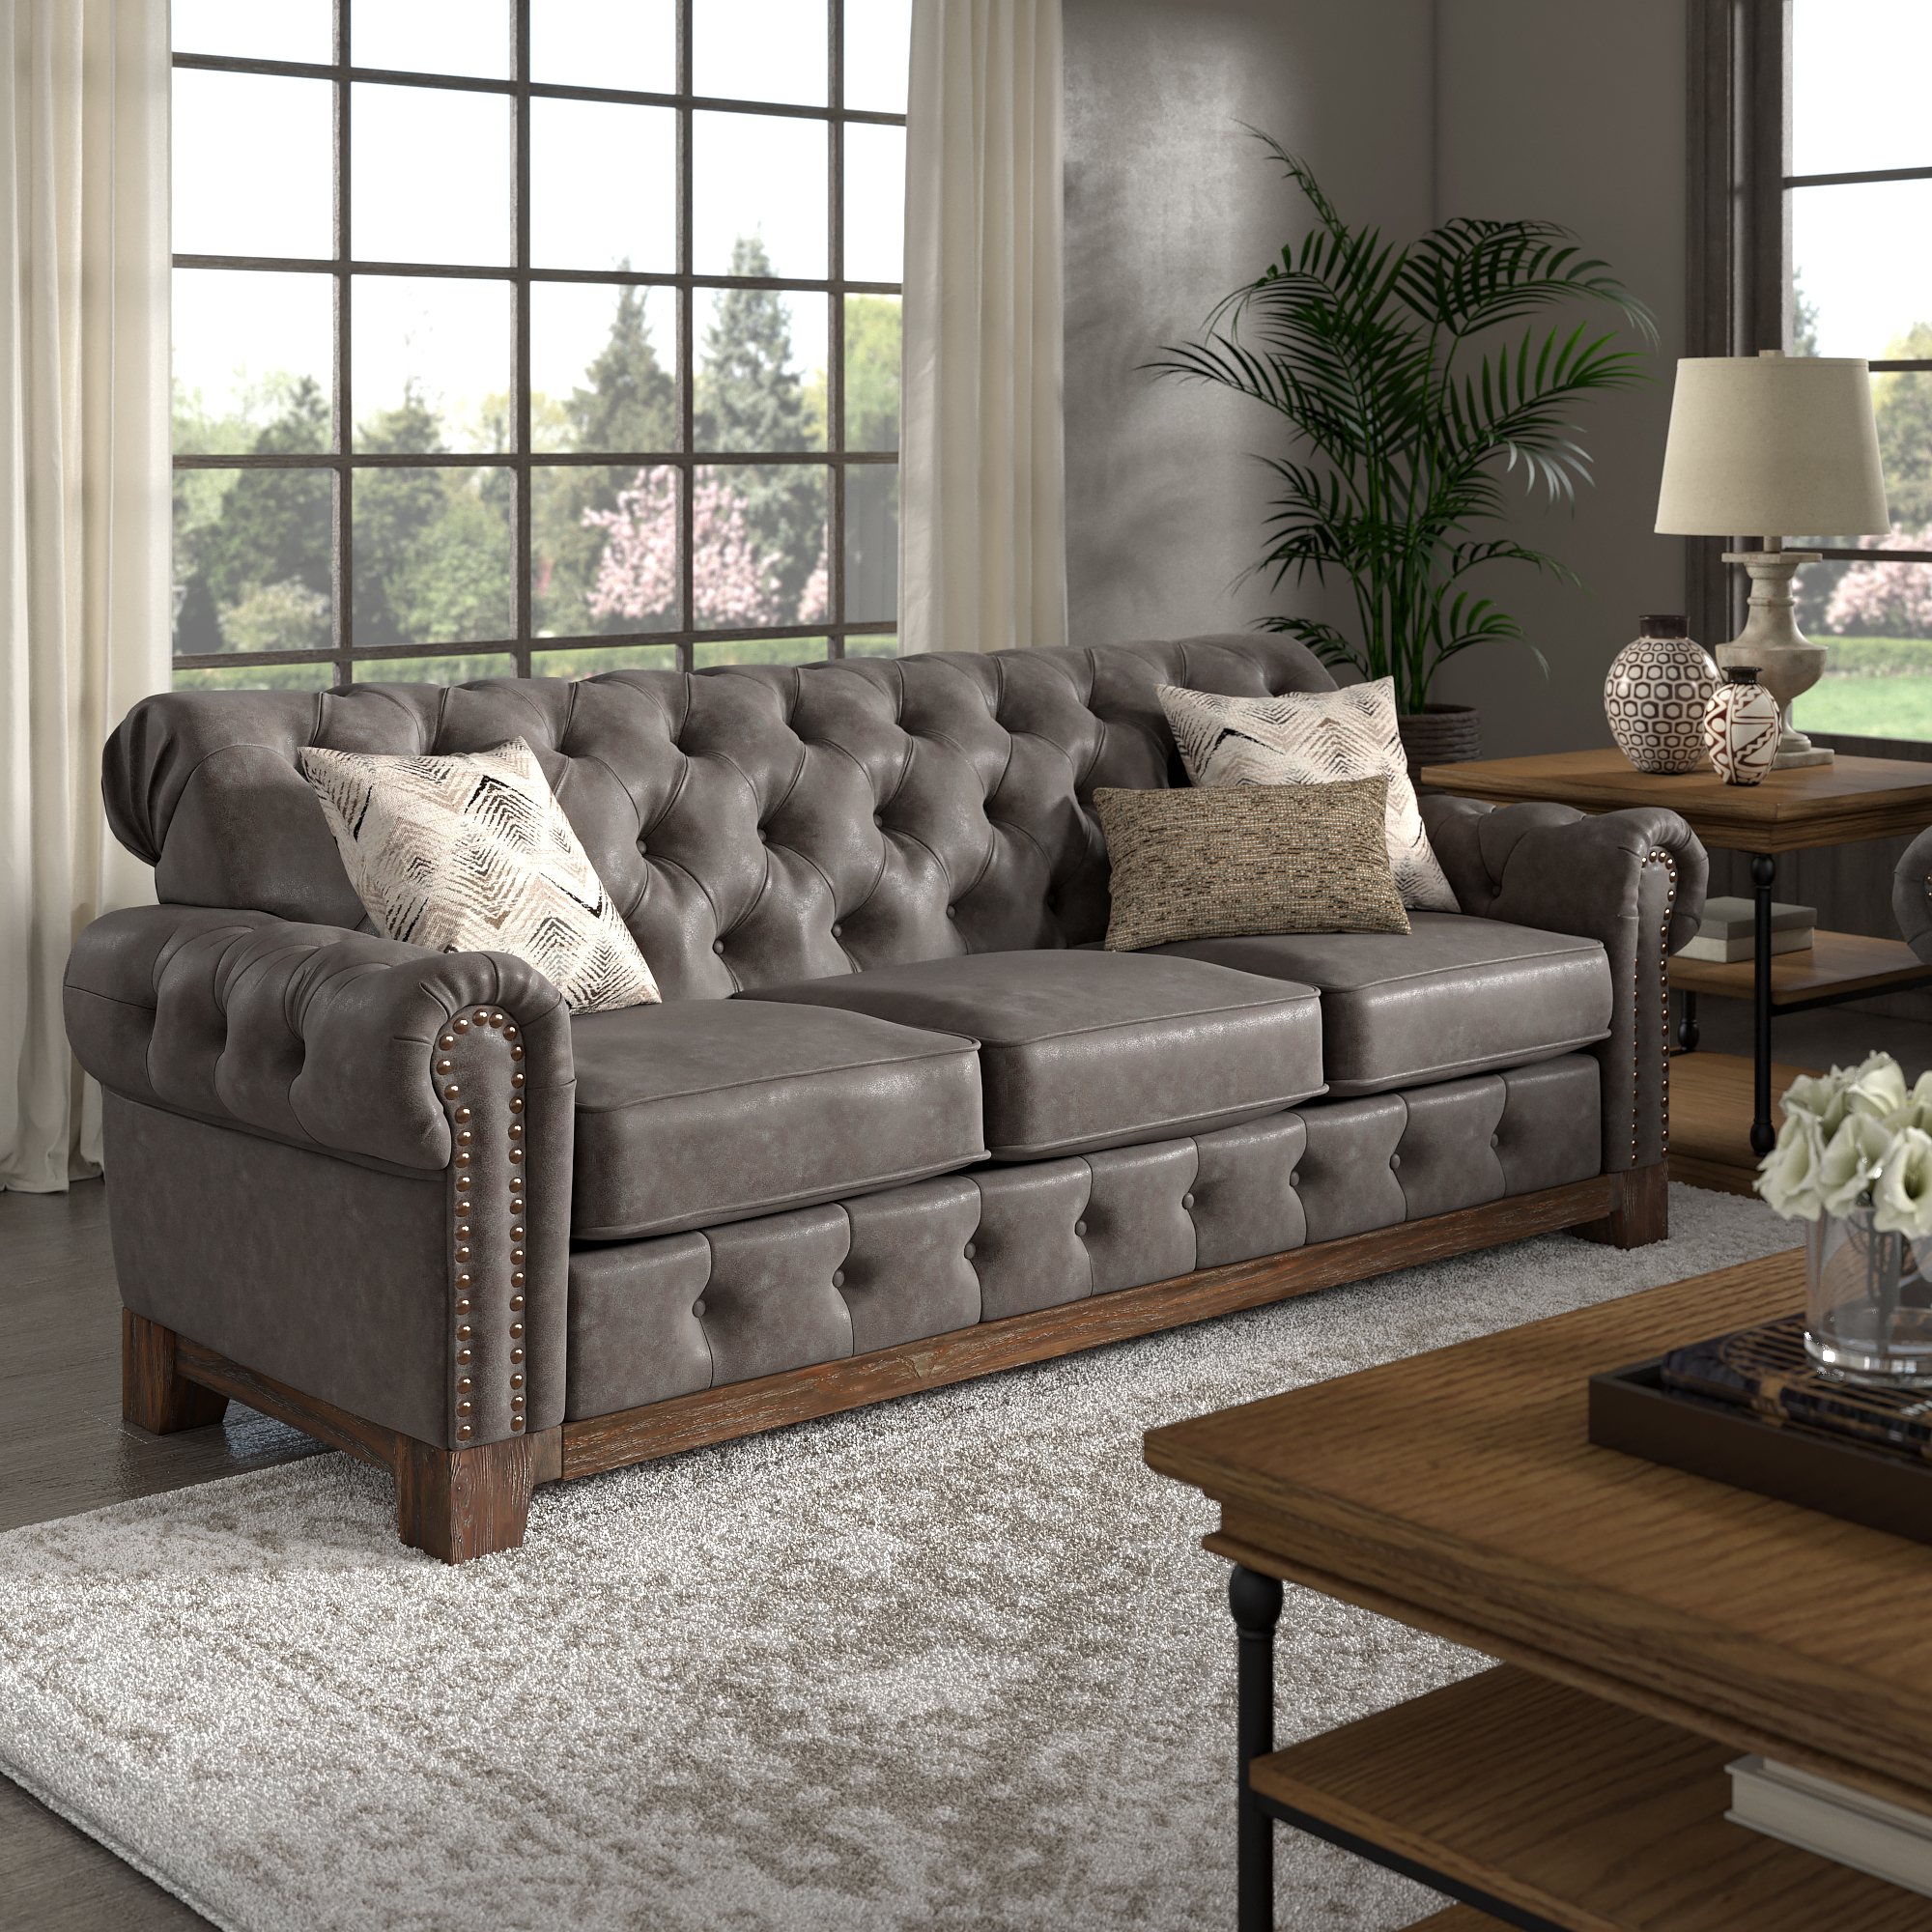 Tufted Rolled Arm Chesterfield Sofa